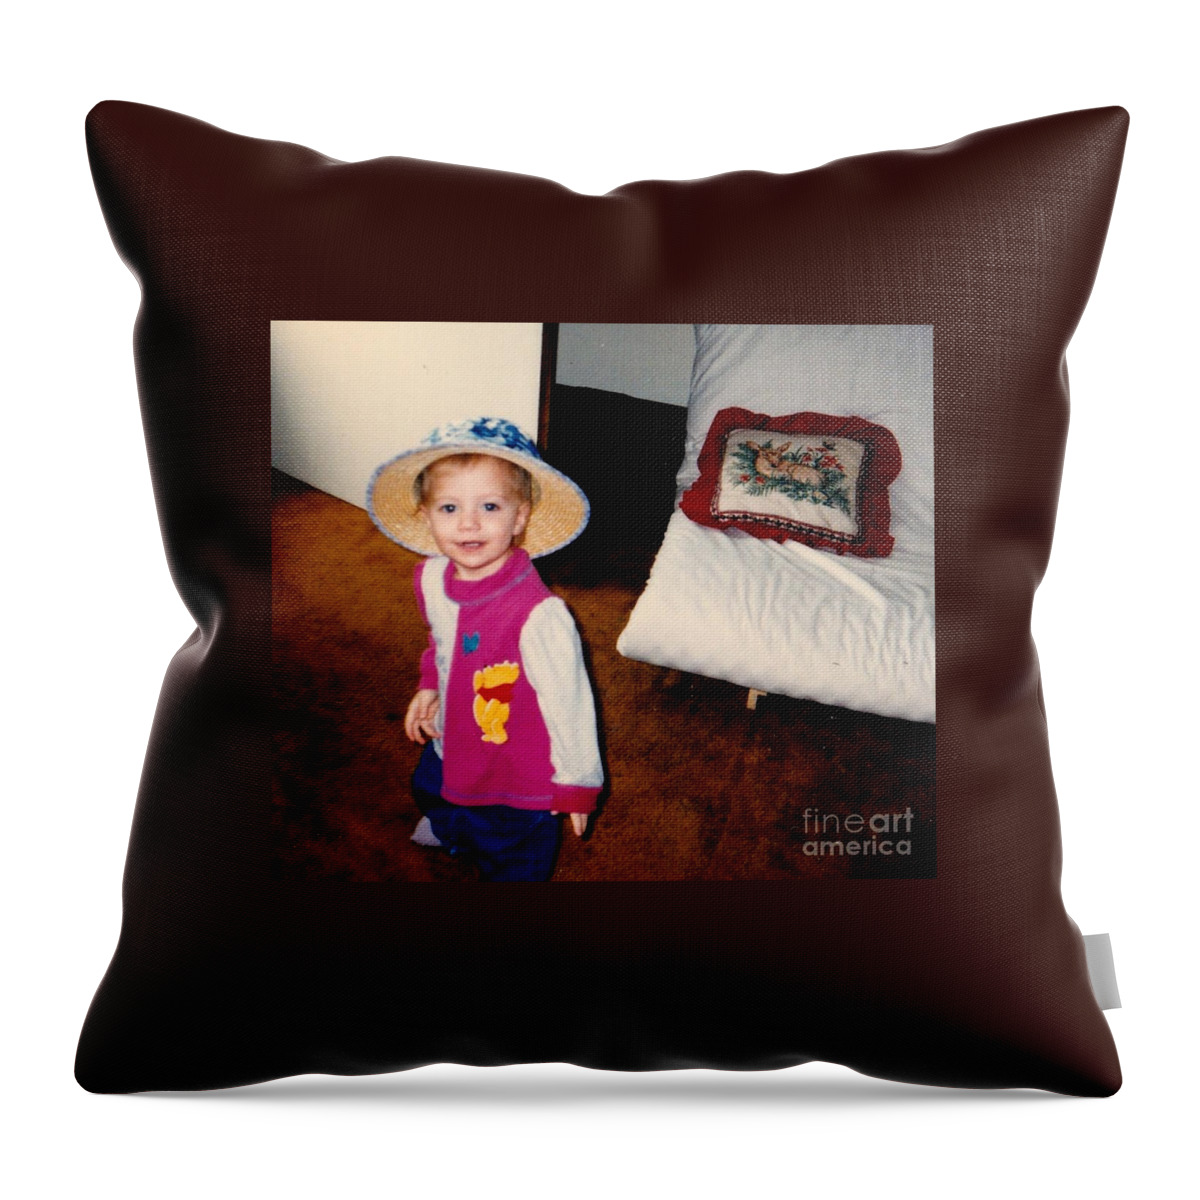  Throw Pillow featuring the photograph The Little Actress by Kelly Awad